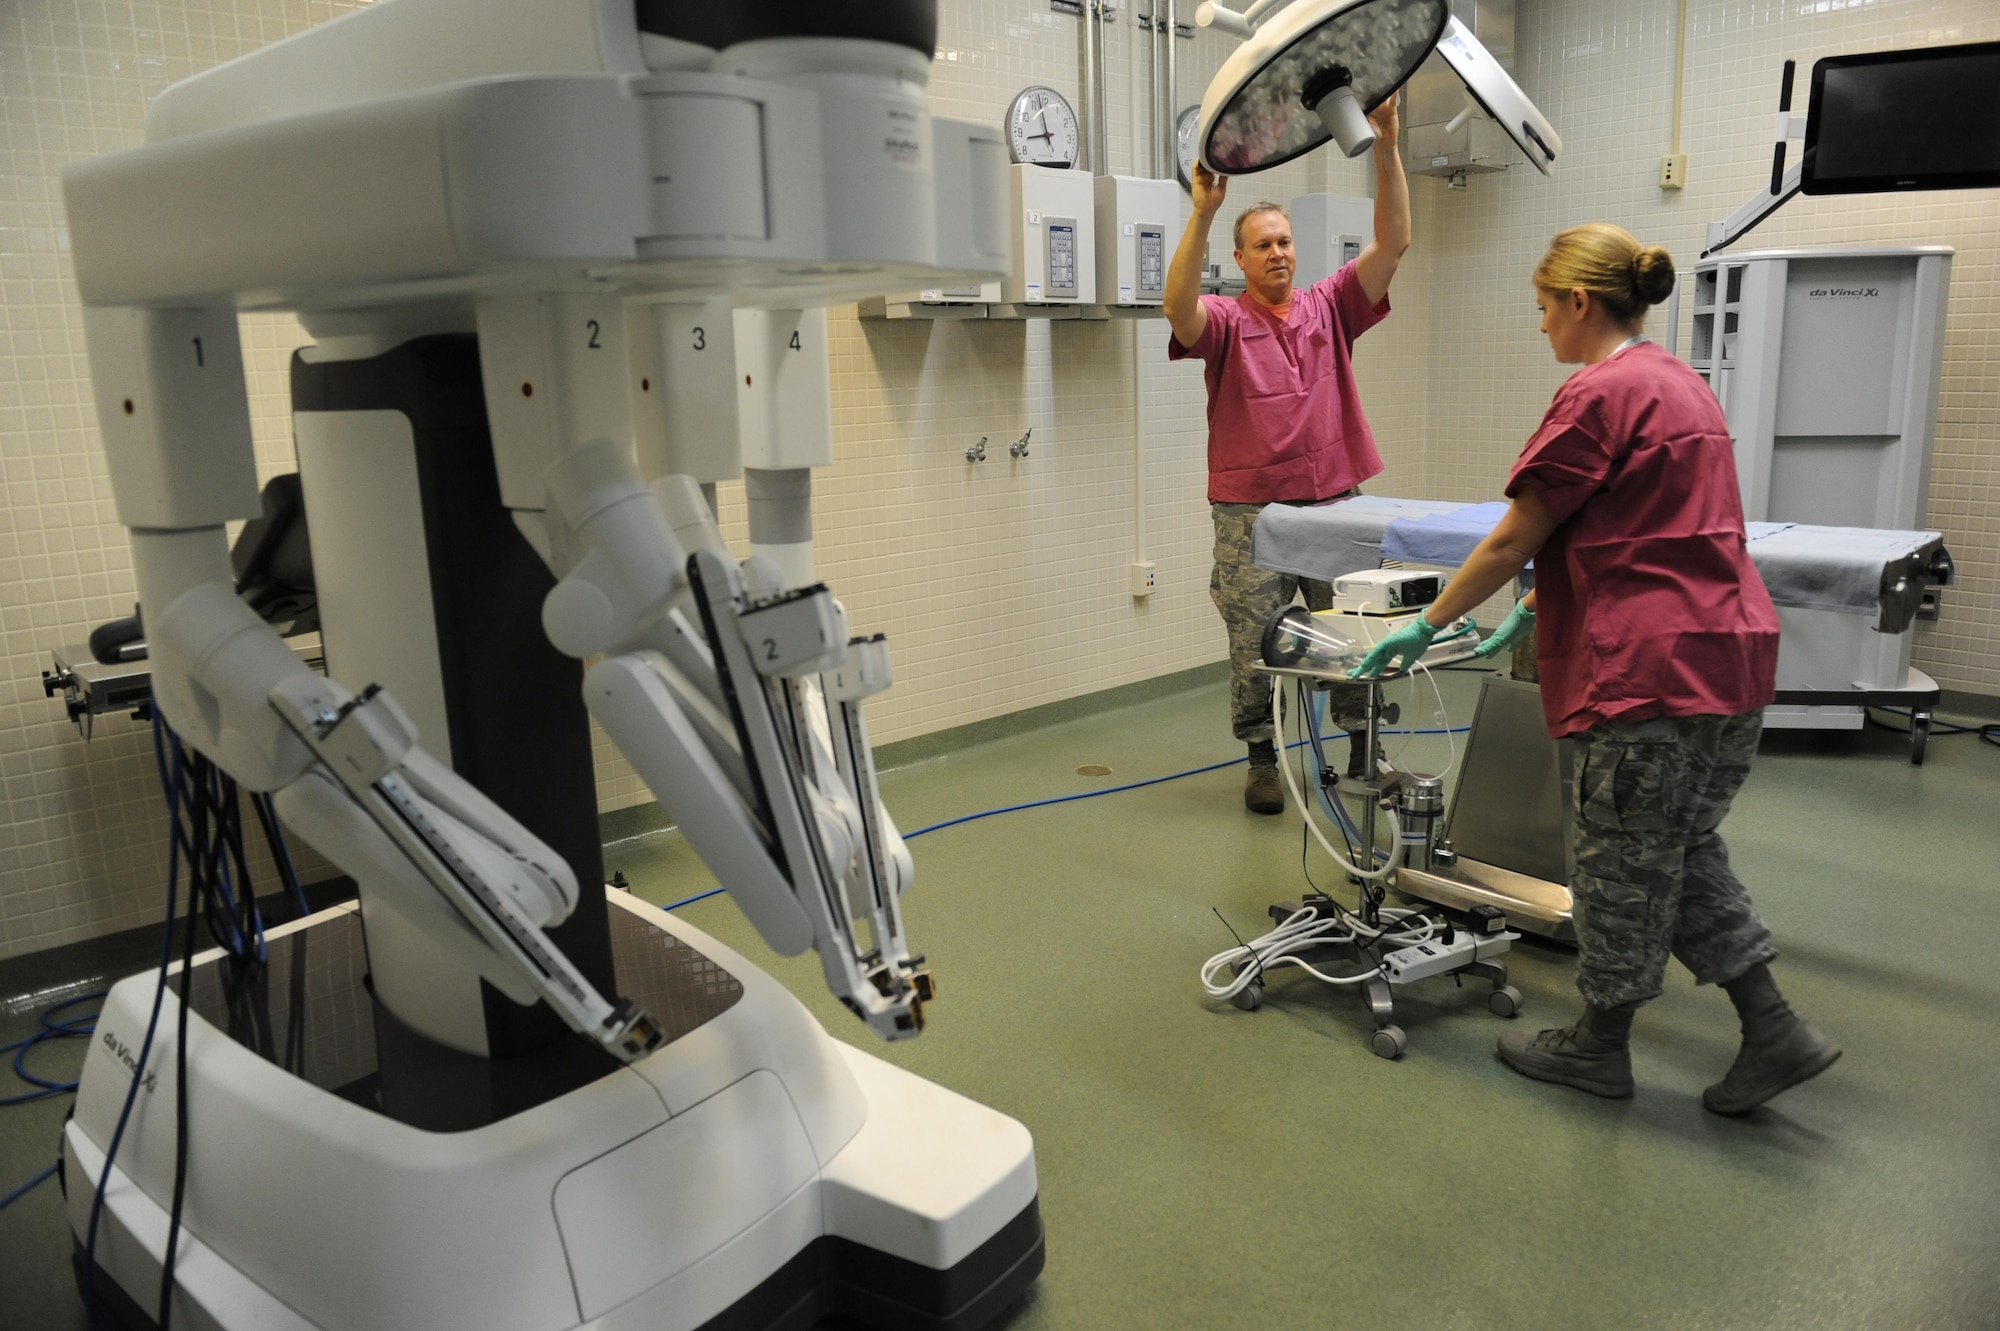 Lt. Col. (Dr.) Thomas Shaak , 81st Medical Support Squadron clinical research laboratory director, and Staff Sgt. Mandy Polen, 81st MDSS clinical research laboratory NCO in charge, prepare a table site for robotic surgical training at the Clinical Research Laboratory Oct. 21, 2016, on Keesler Air Force Base, Miss. The Keesler Medical Center recently acquired two of the da Vinci Xi which is one of the newest robotic surgical systems out there and the first of its kind for the Air Force. One surgical robot is set up as part of the Institute for Defense Robotic Surgical Education to assist surgeons in getting their official robotic surgery credentials. (U.S. Air Force photo by Kemberly Groue/Released)